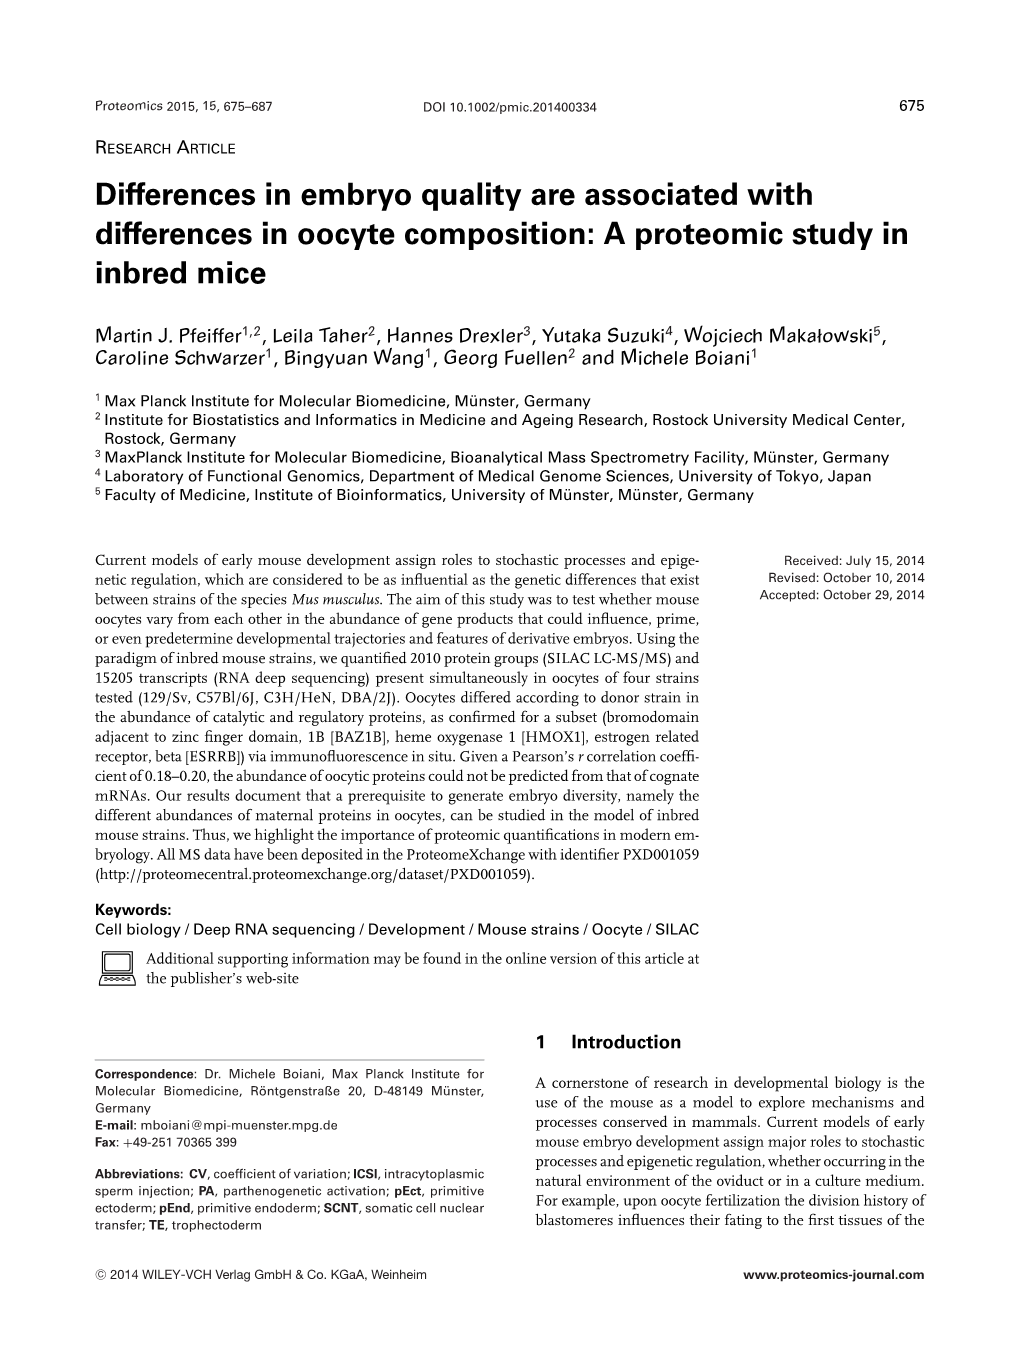 Differences in Embryo Quality Are Associated with Differences in Oocyte Composition: a Proteomic Study in Inbred Mice